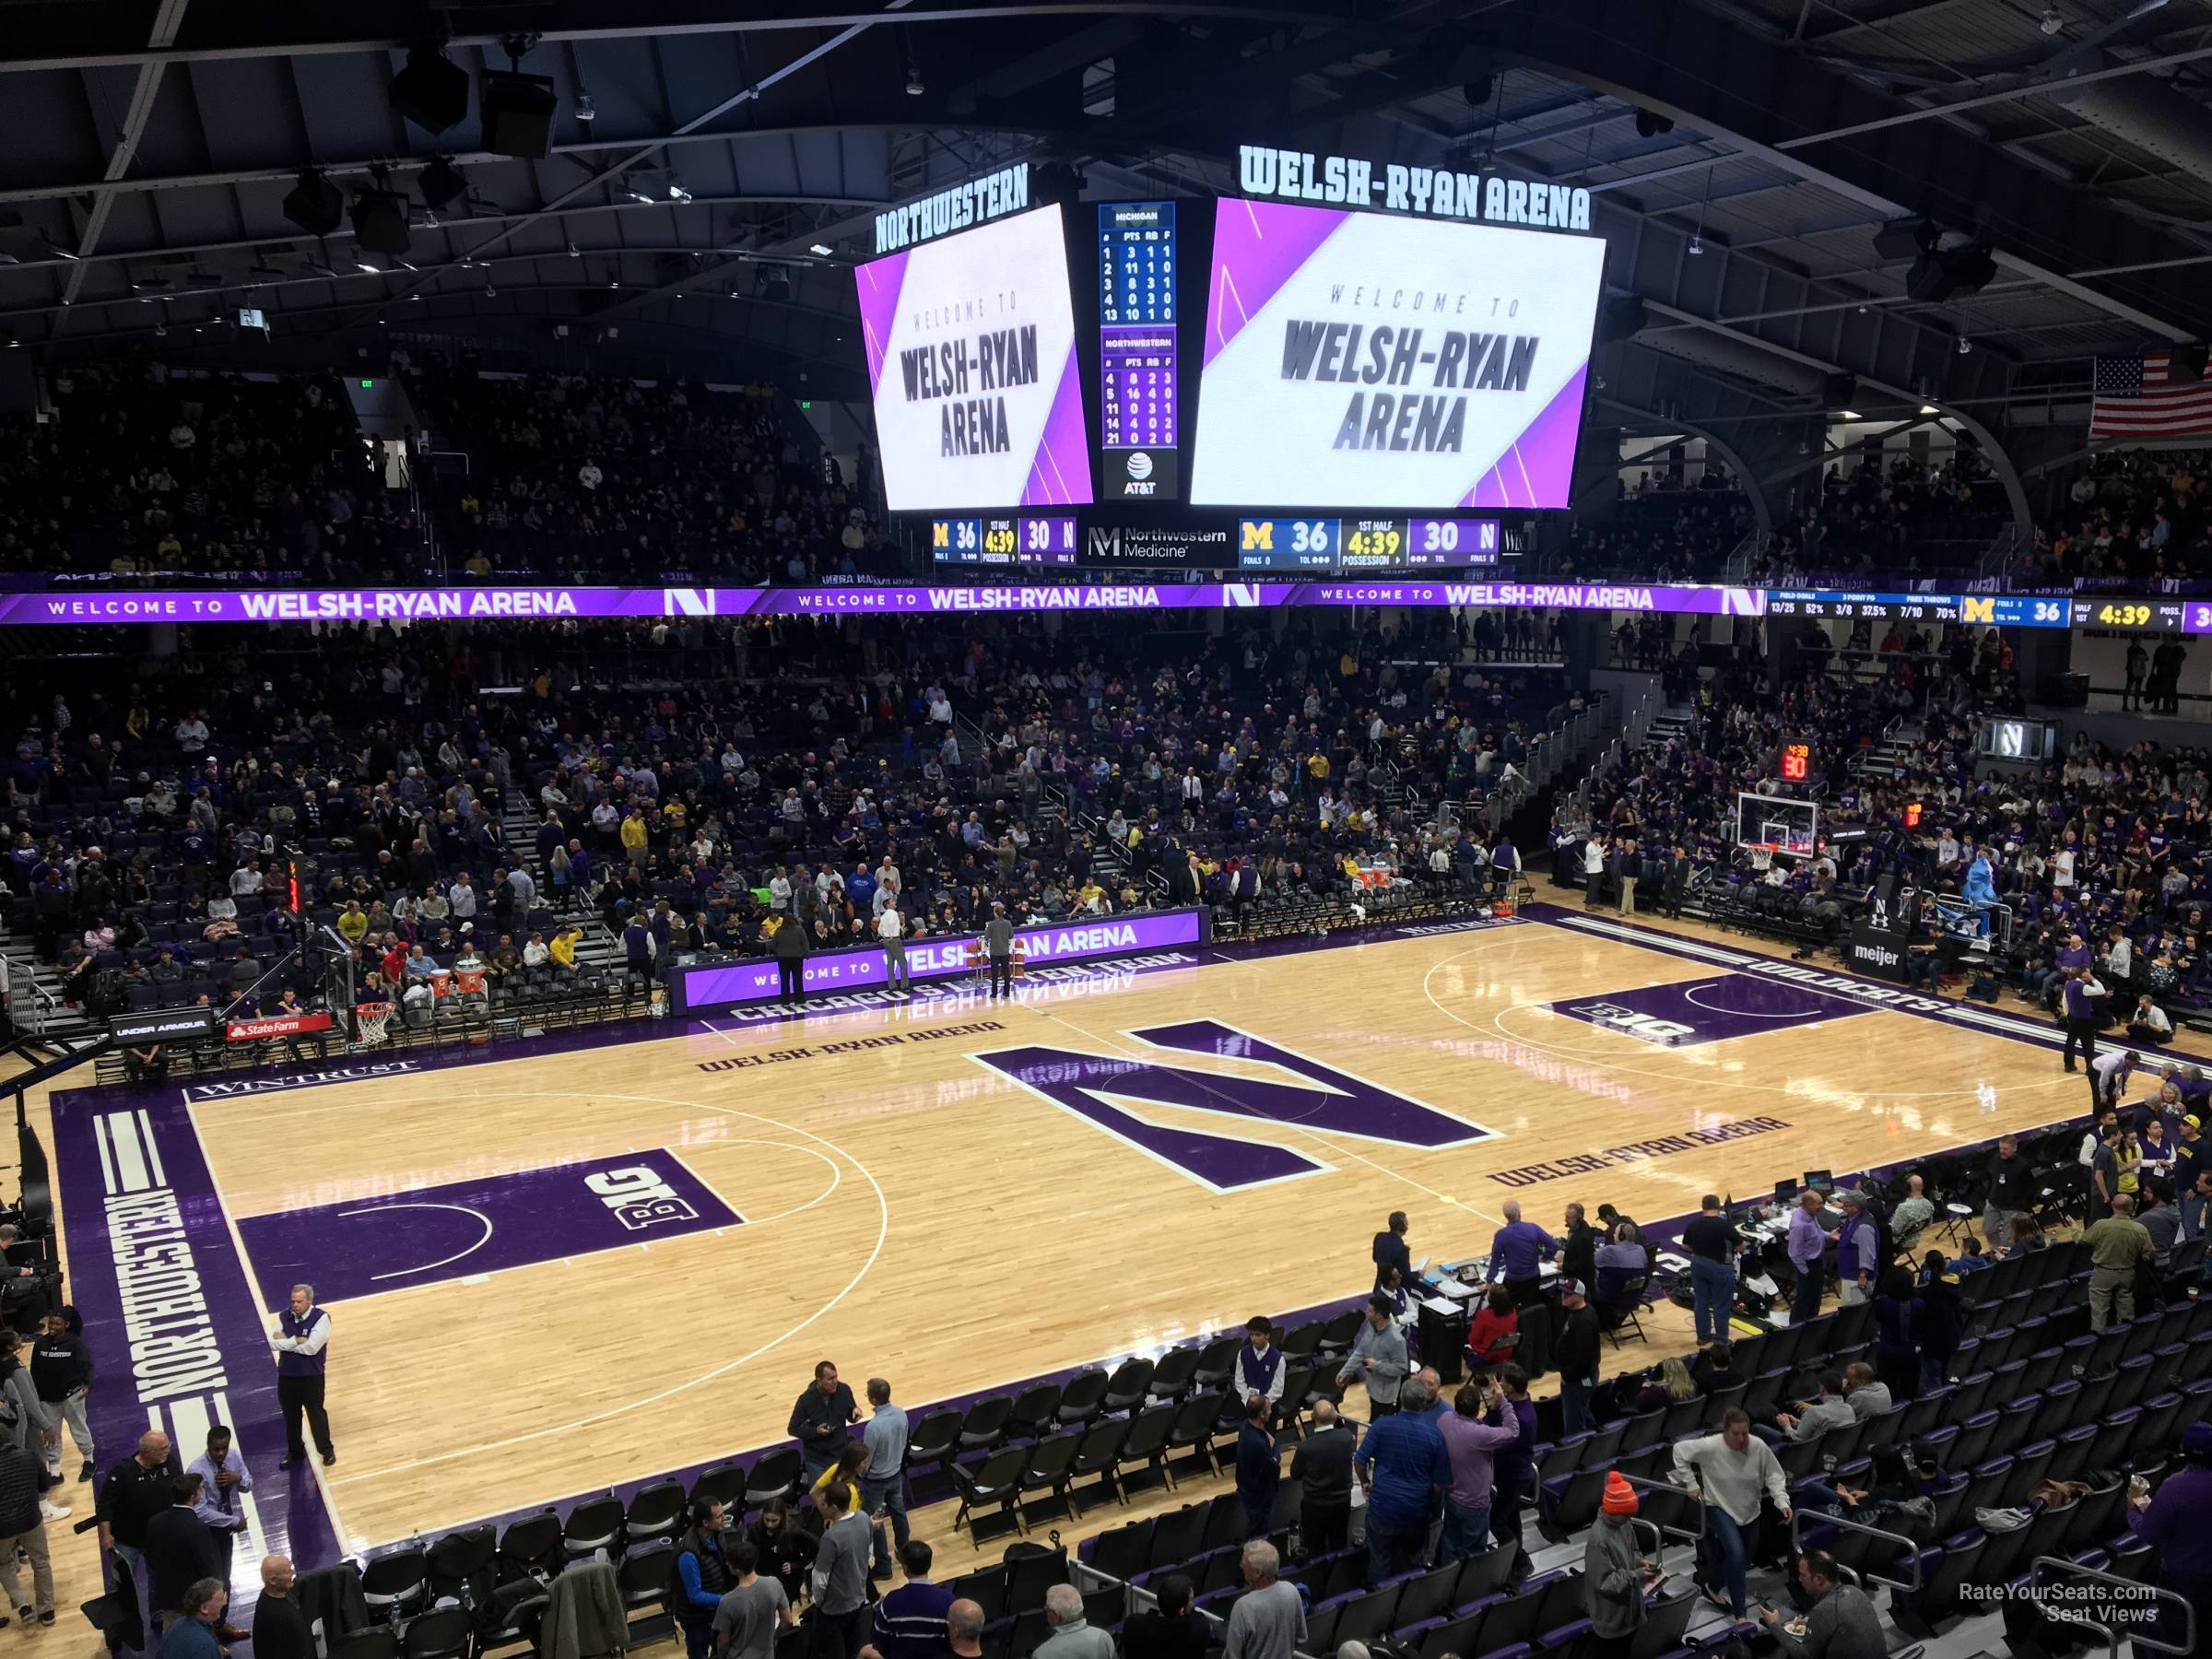 section 220, row 1 seat view  - welsh-ryan arena